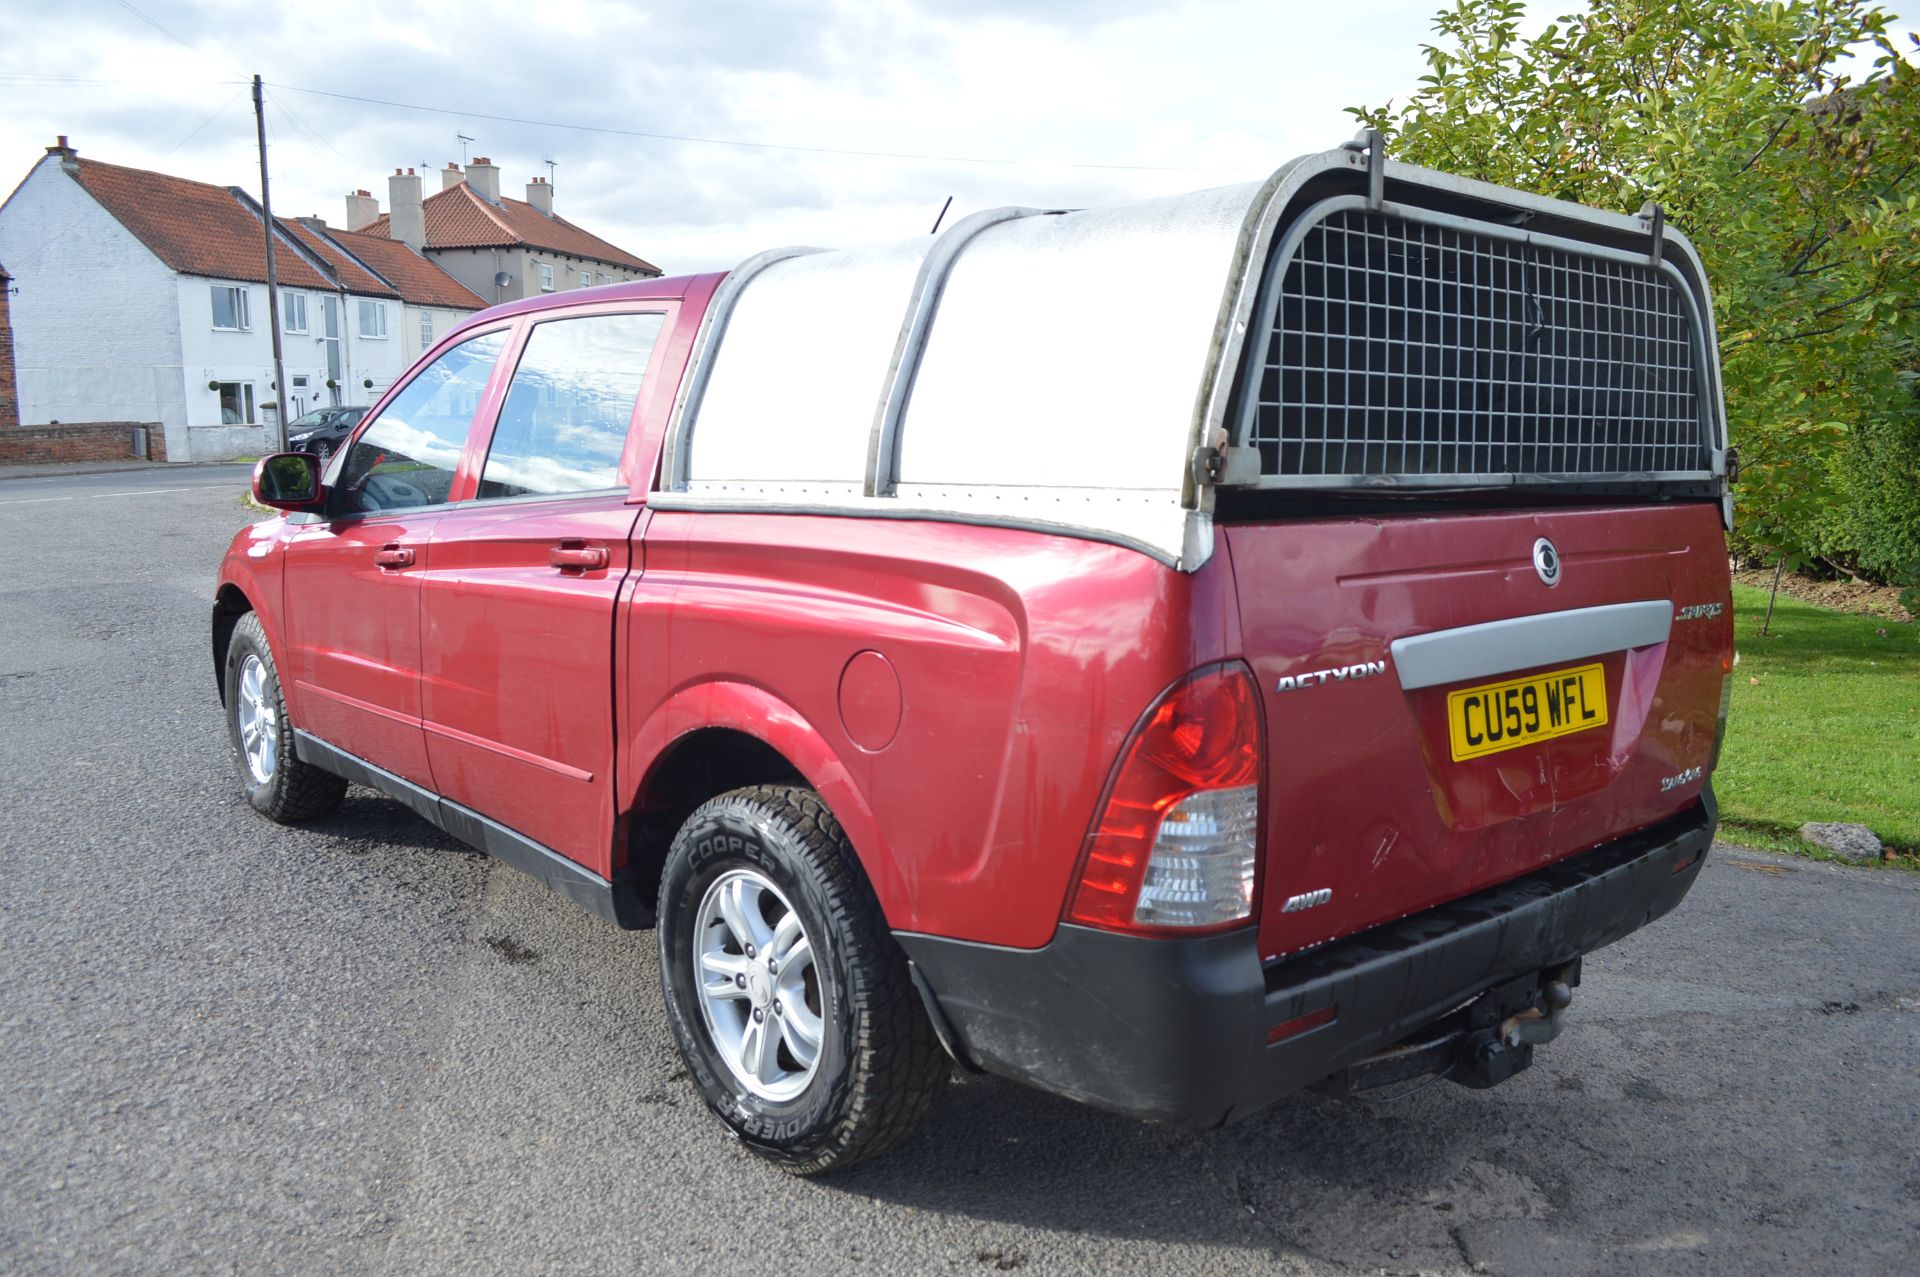 2009/59 REG SSANGYONG ACTYON 4WD SPORTS PICK-UP, SHOWING 1 FORMER KEEPER - Image 4 of 19